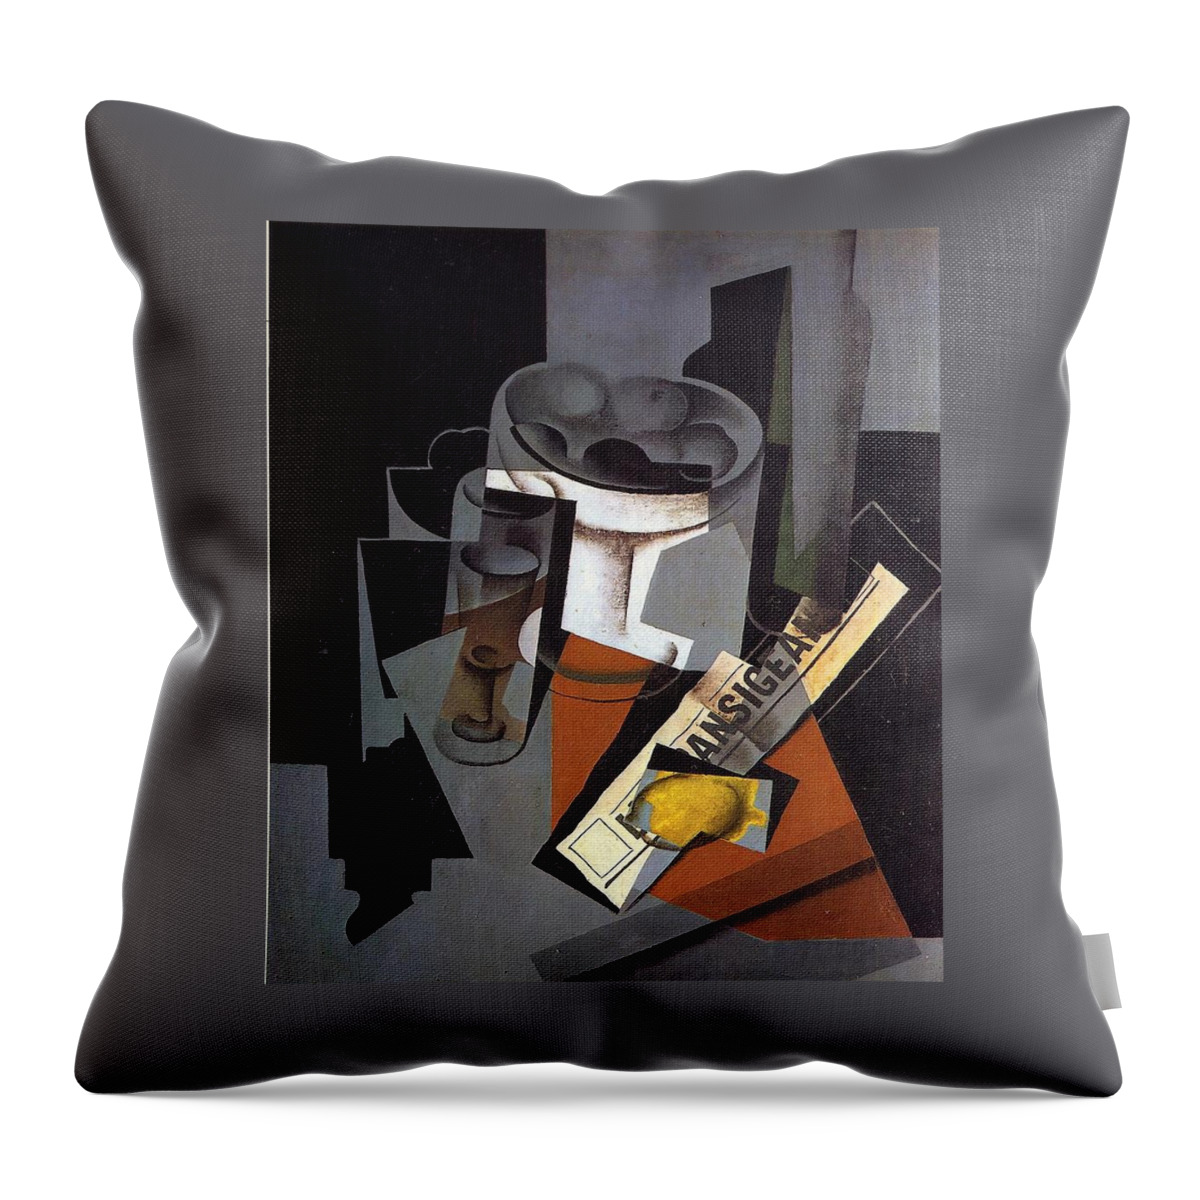 Still Life With Newspaper - Juan Gris 1916 Synthetic Cubism Throw Pillow featuring the painting Still Life with Newspaper #1 by Juan Gris